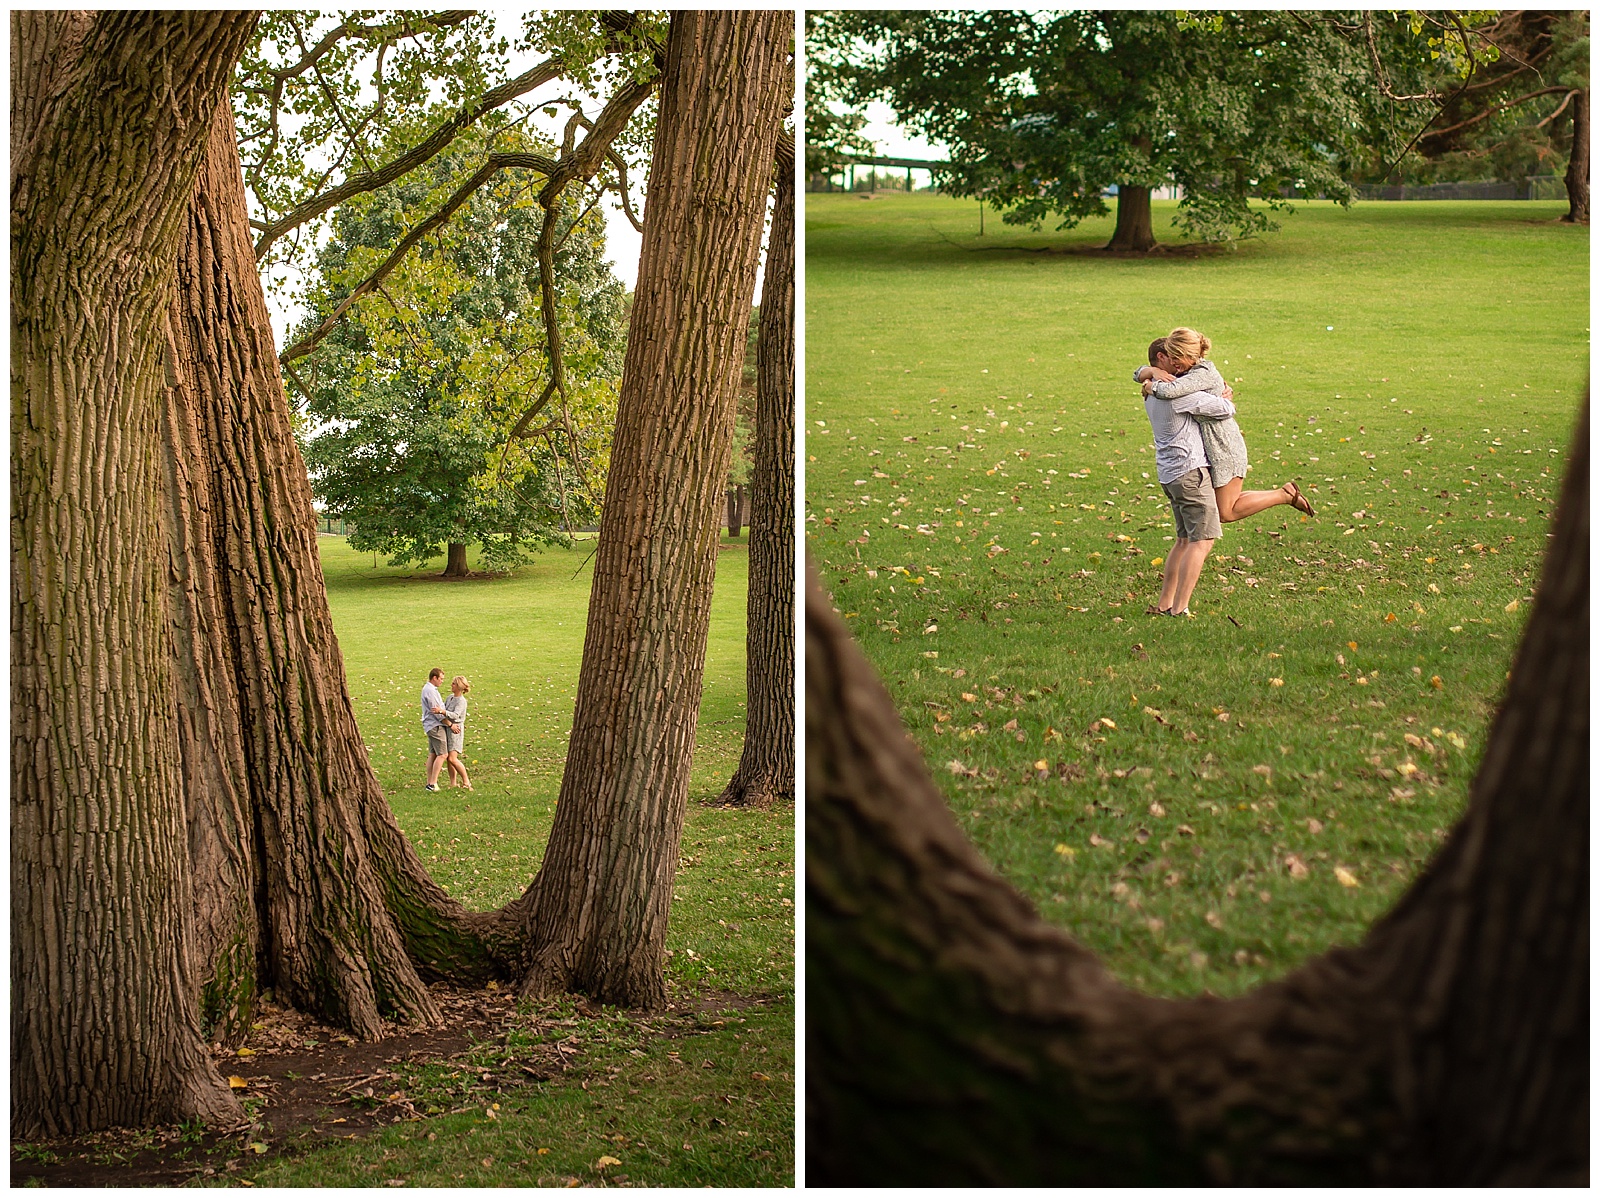 An engagement session in Loose Park in Kansas City.